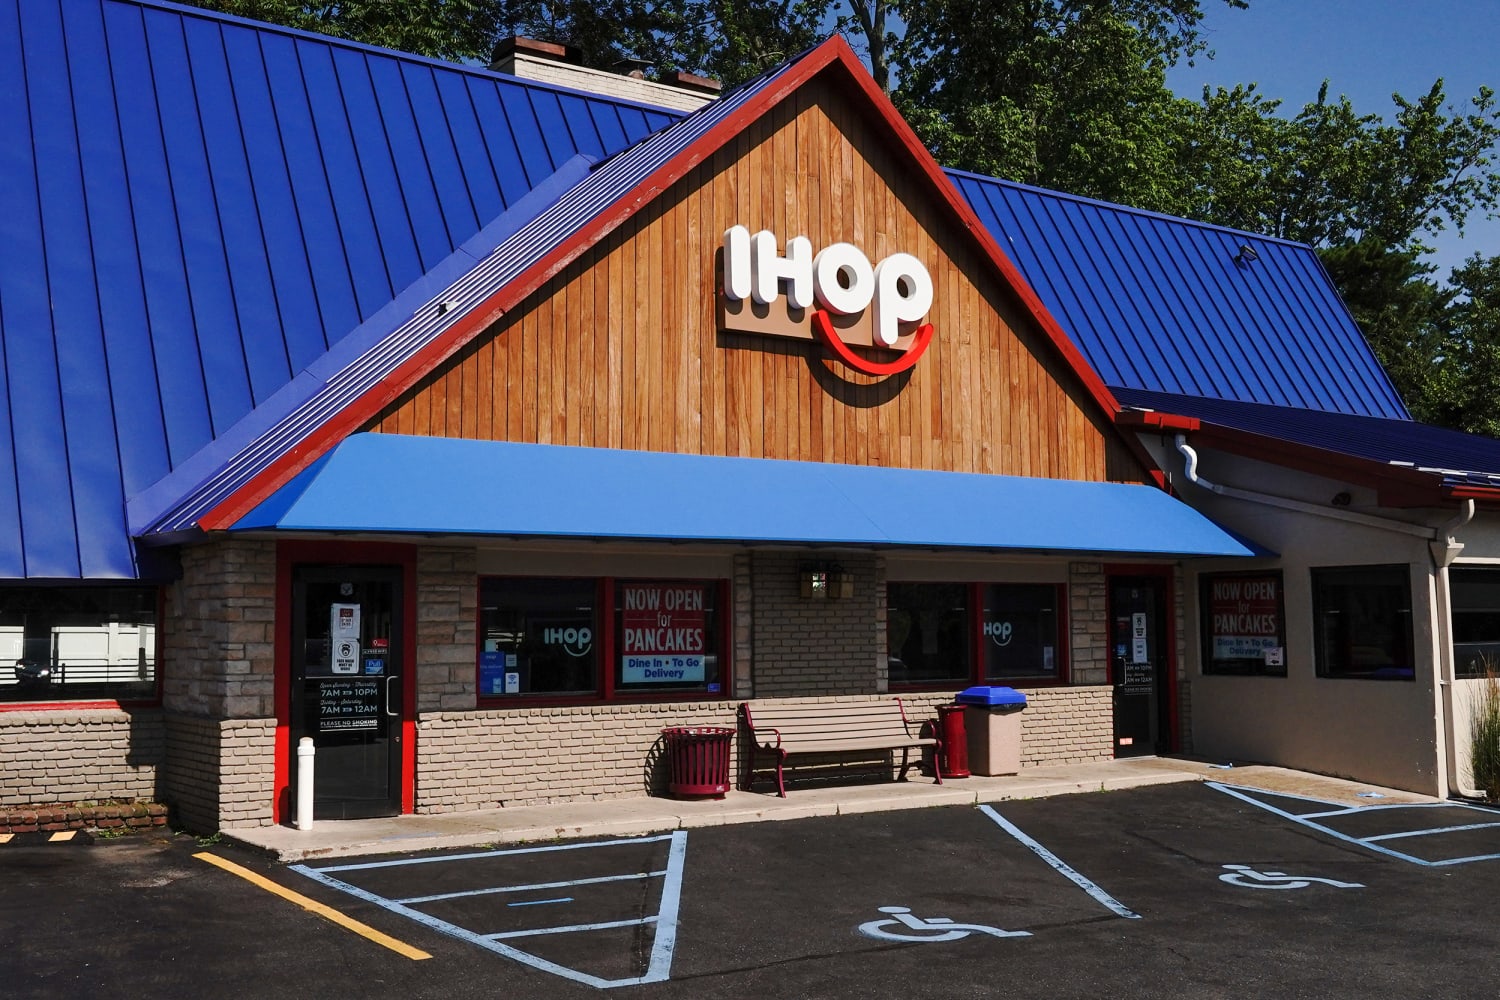 IHOP Is Opening a New Brand of Restaurants This Year